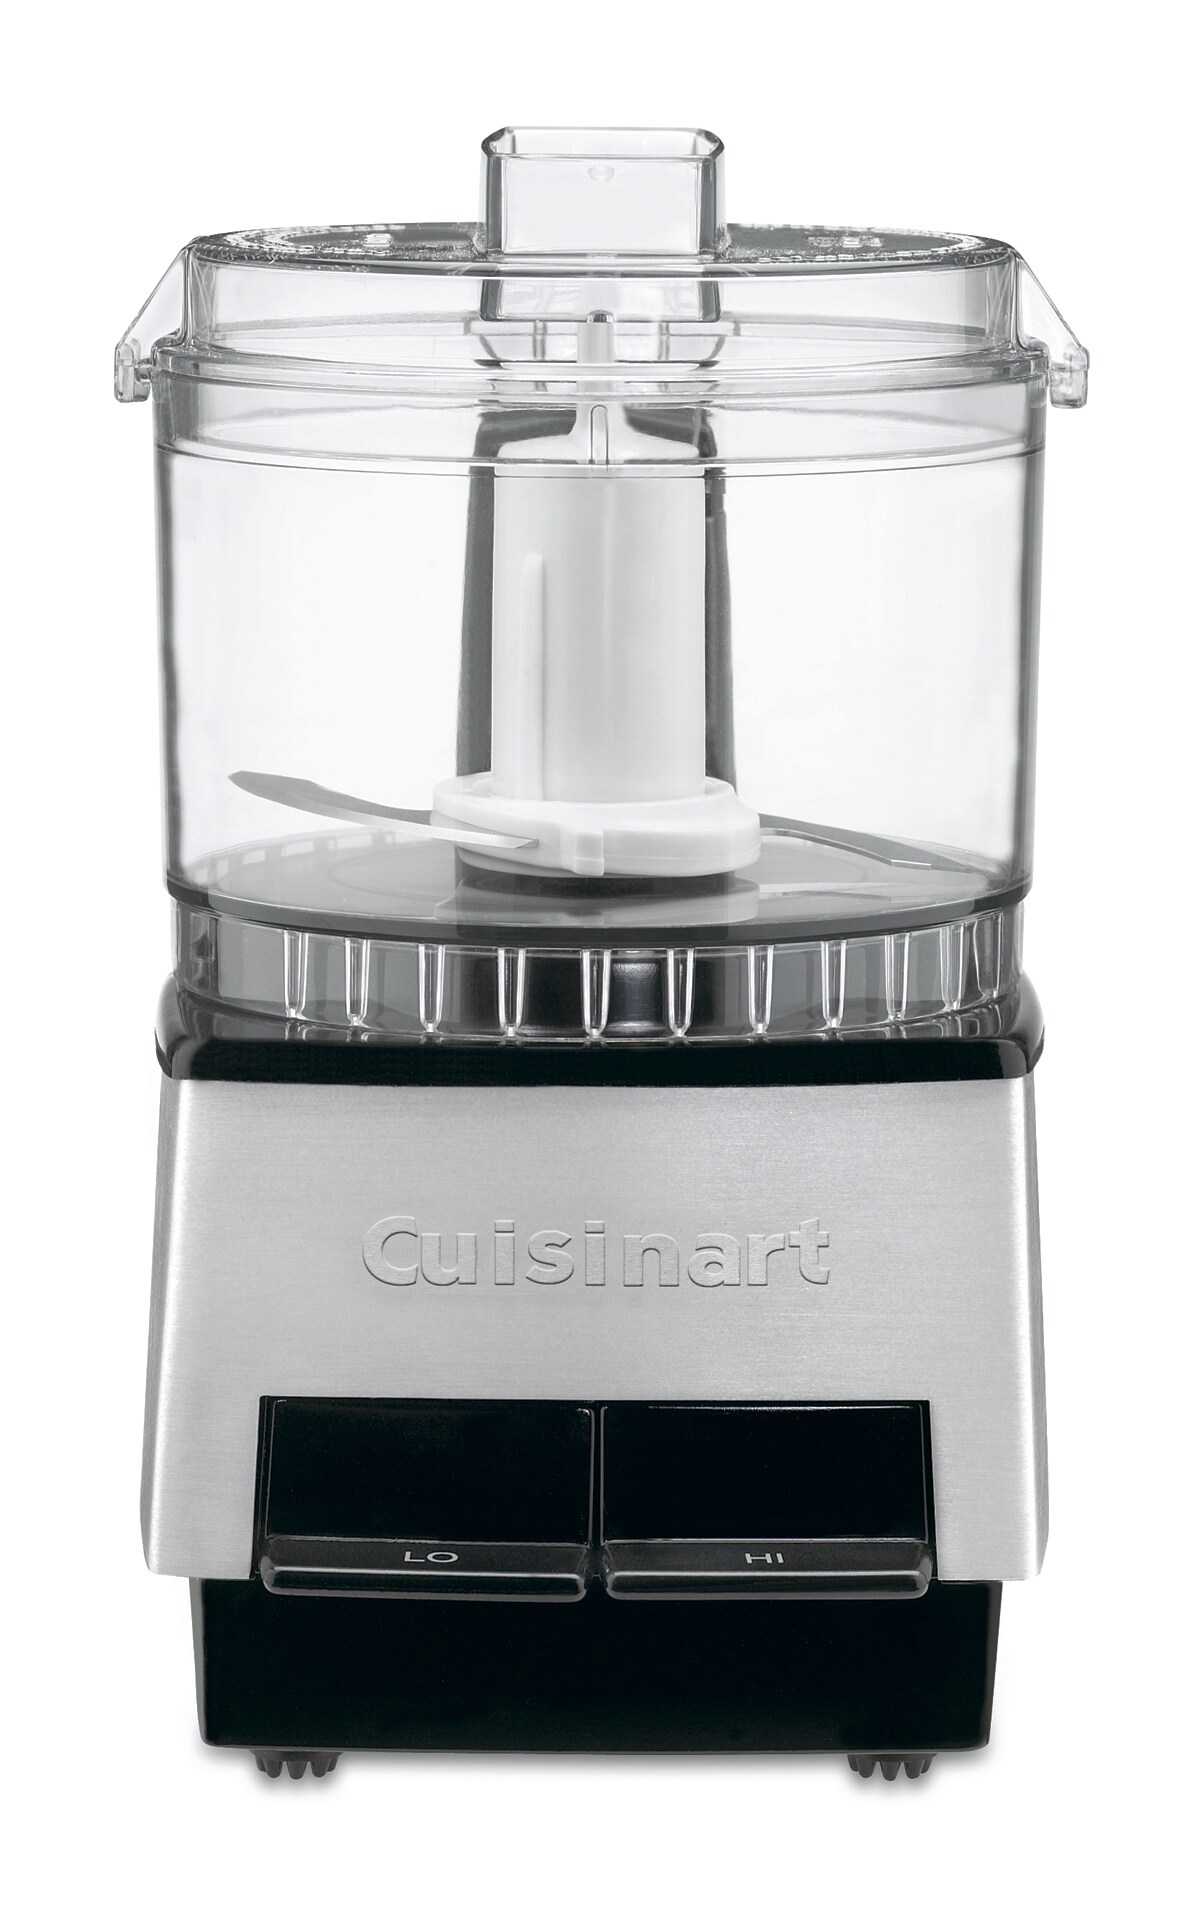 Cuisinart 21-ounce Workbowl with Cover